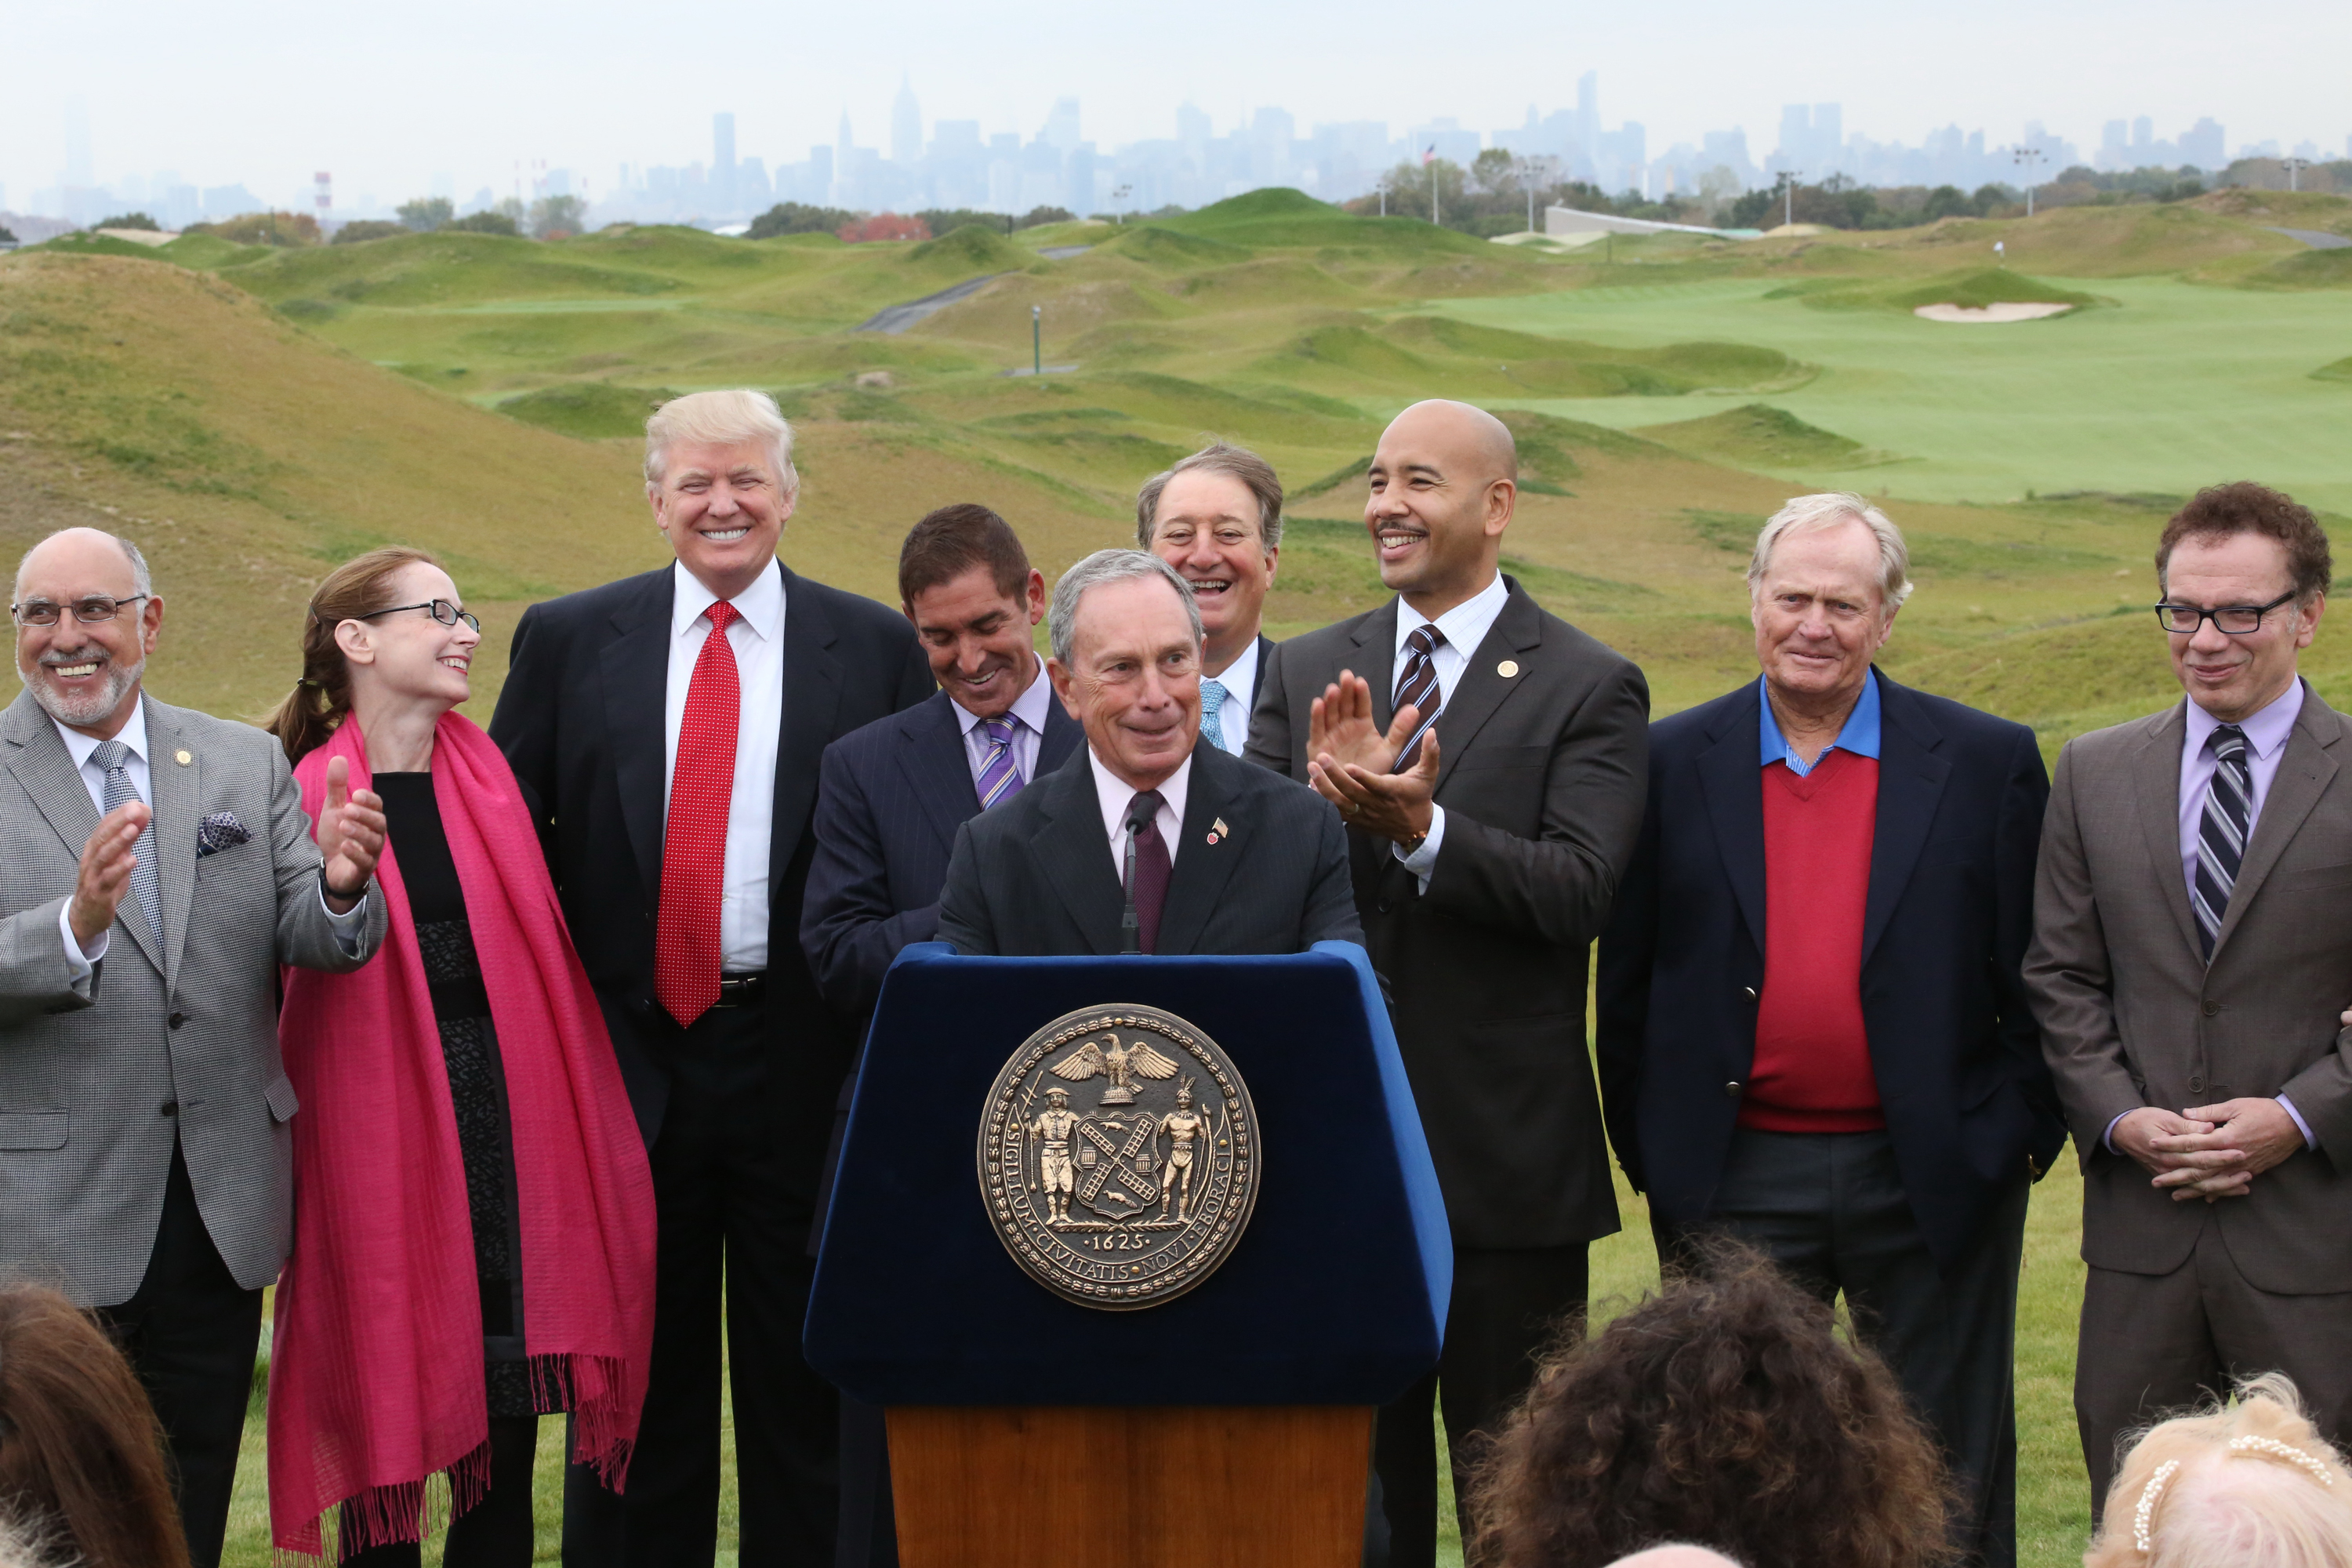 Bronx Borough President Ruben Diaz Jr., to the right of the podium, at a 2013 event announcing the opening of Trump Golf Links in Ferry Point Park, with Mayor Mike Bloomberg (center), Donald Trump and others.